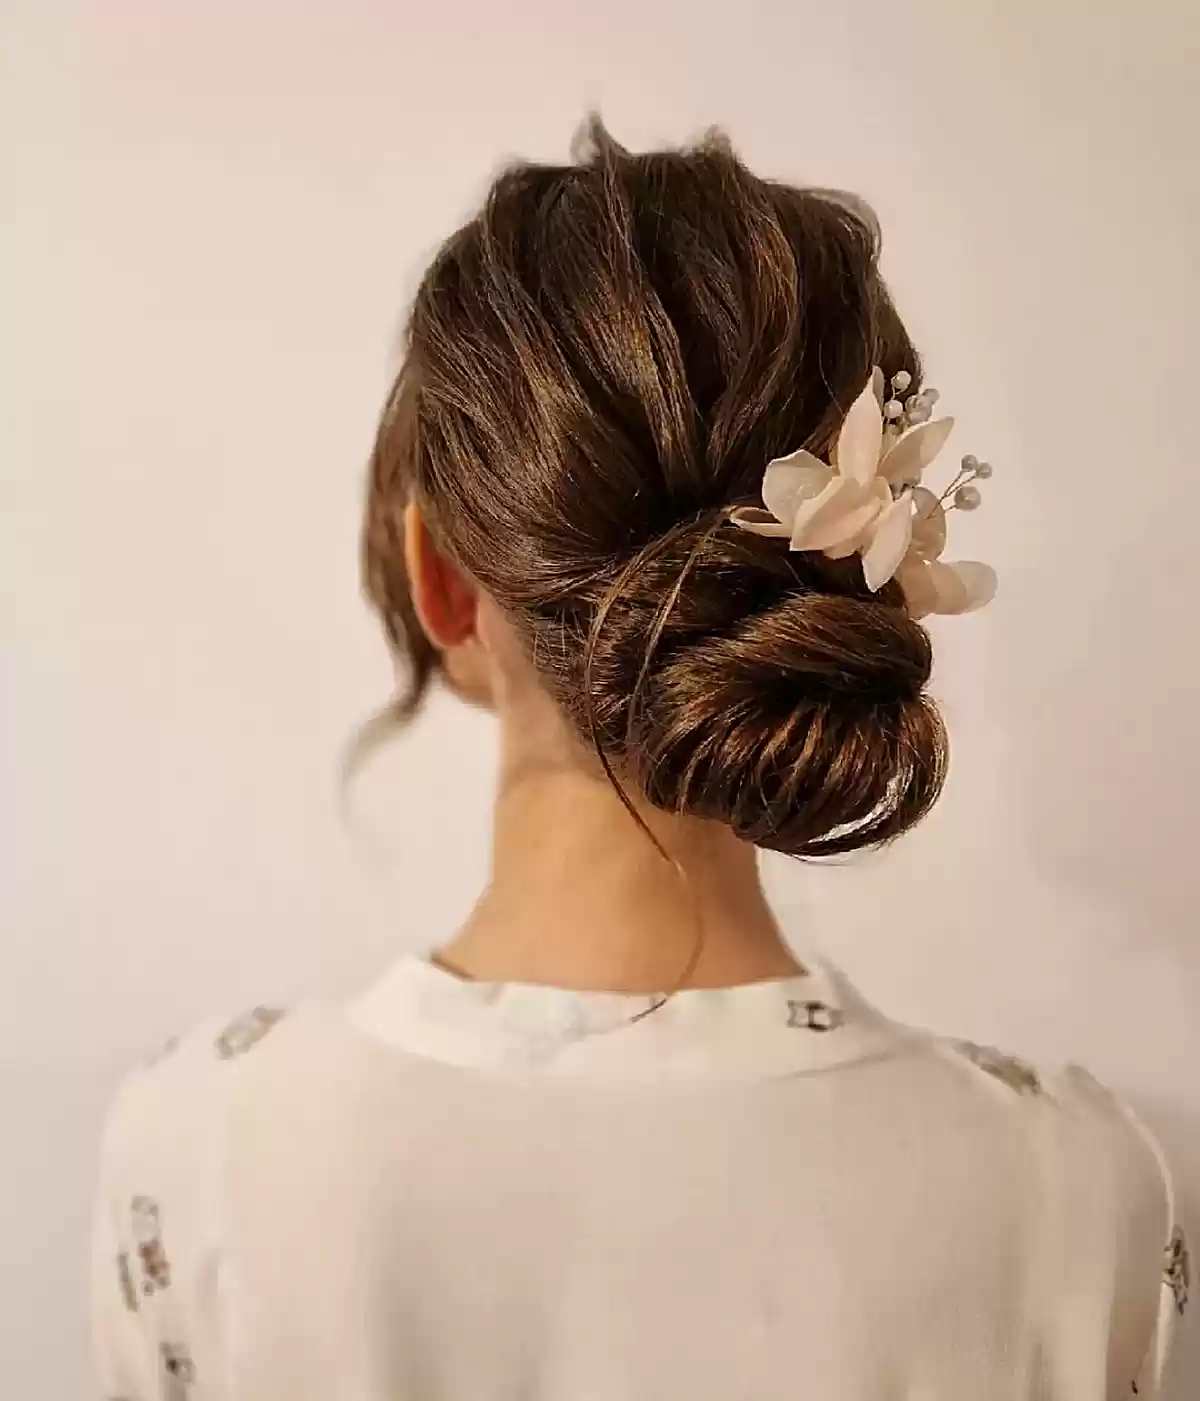 Low Pinned Bun for Long Hair with Pulled Strands and Flower Hair Accessory for Prom